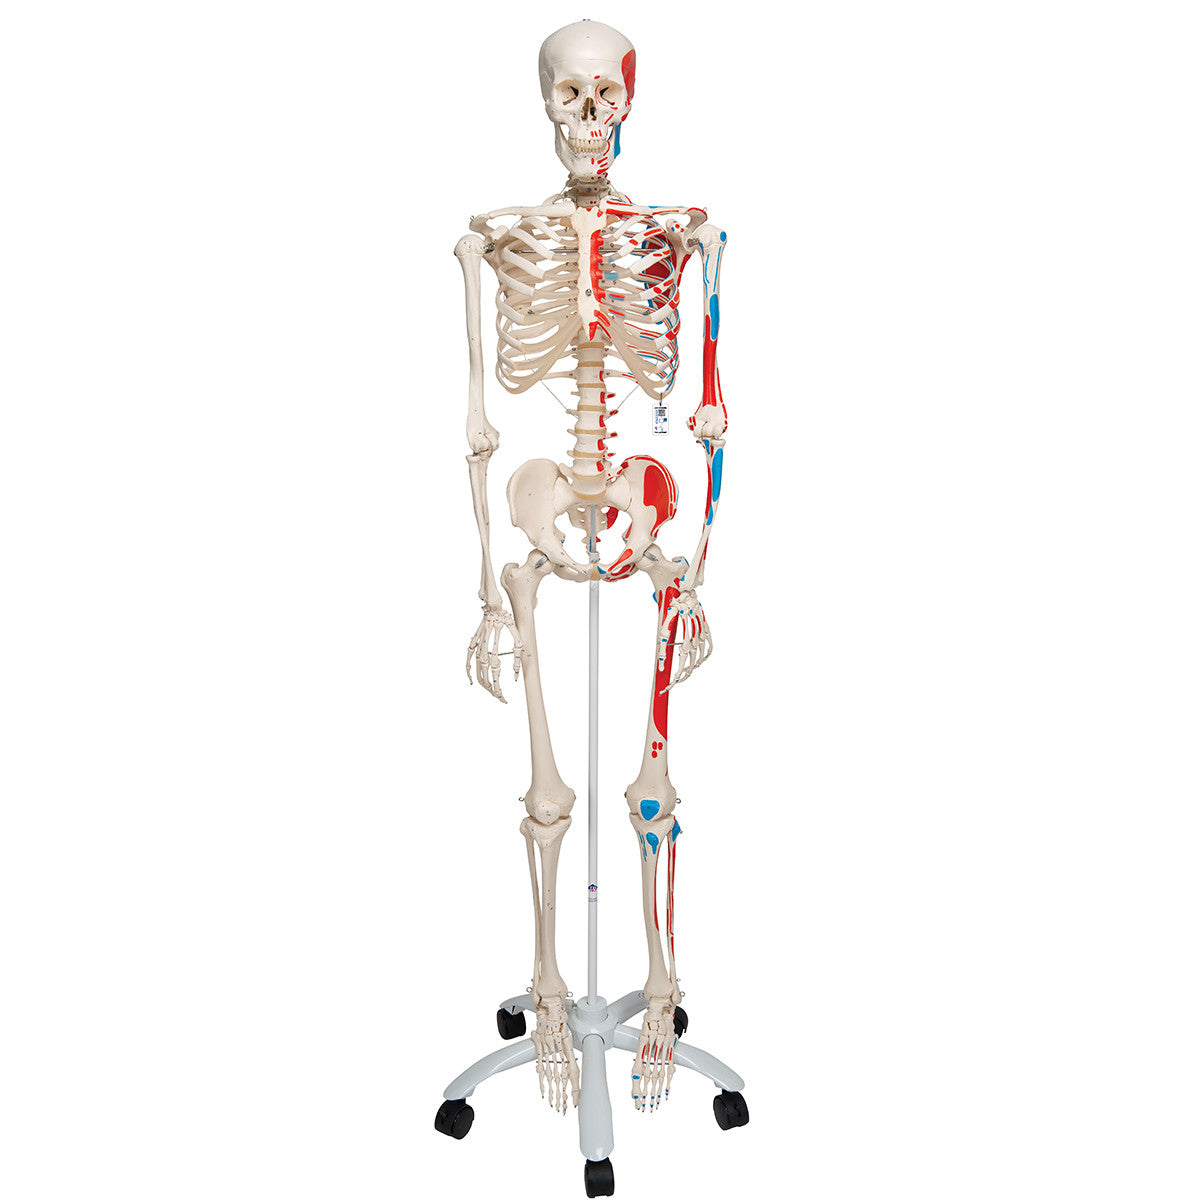 Artificial Skeleton Model with Painted Muscle Origins and Inserts | 3B Scientific A11